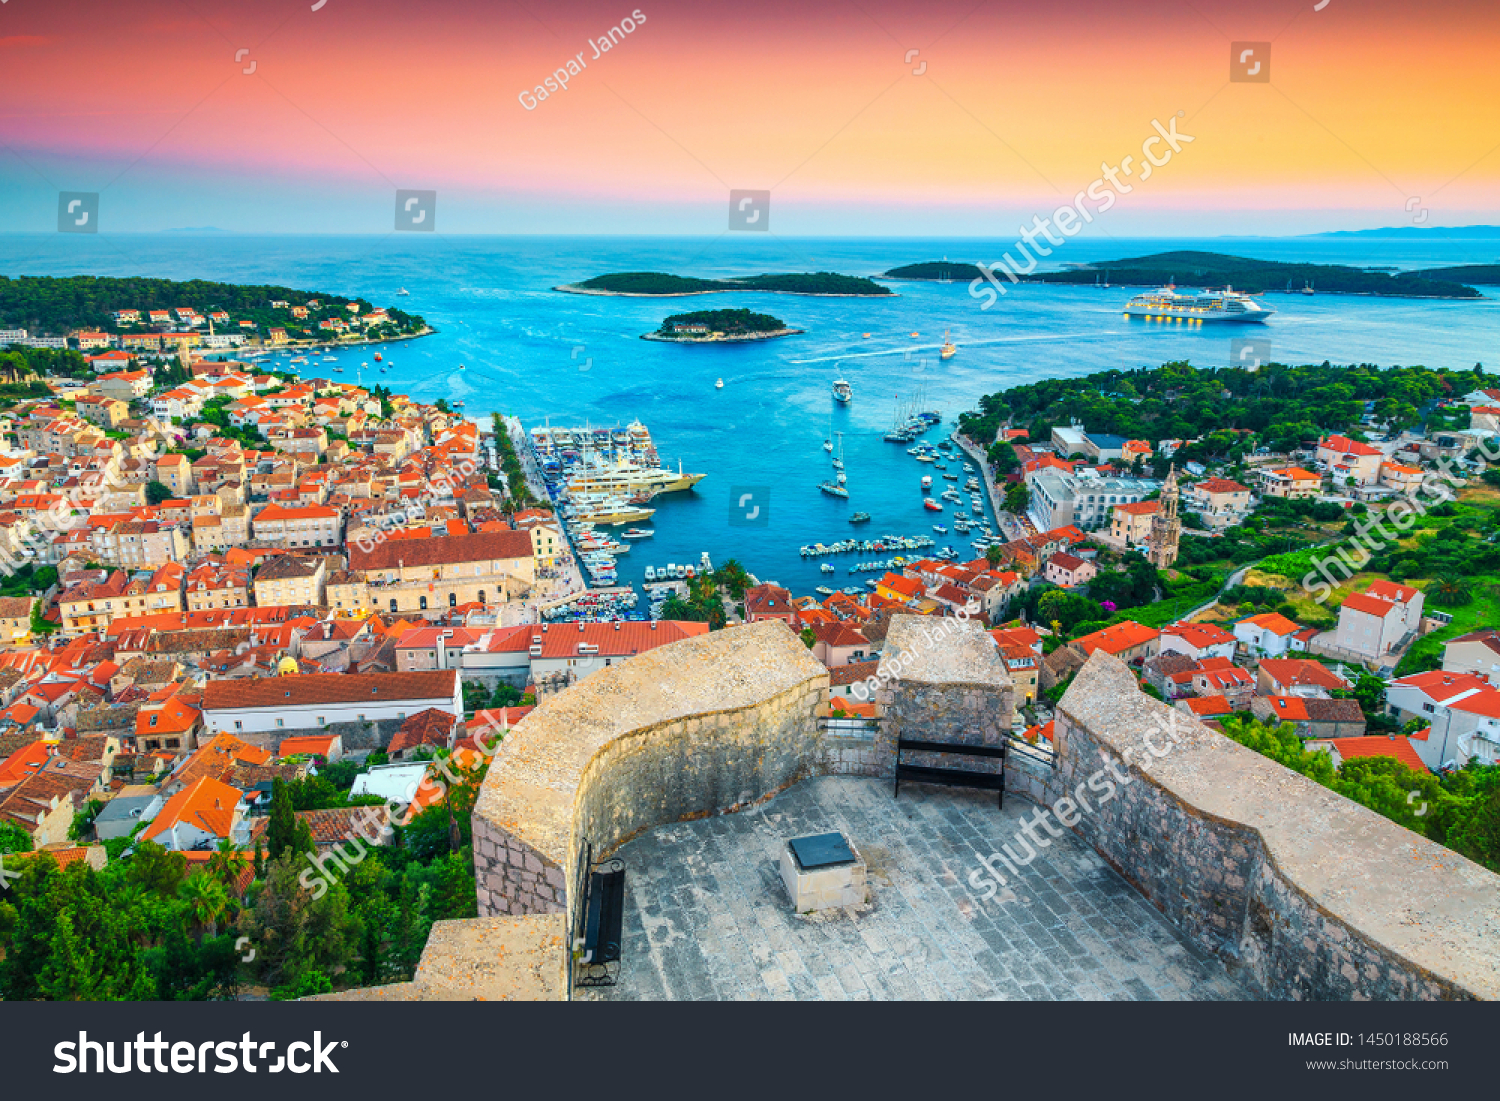 Famous touristic and travel destination. View from the Tvrdava Fortica (Spanjola) fortress at sunset. Green islands, blue lagoons and fantastic harbor, Hvar, Hvar island, Dalmatia, Croatia, Europe #1450188566